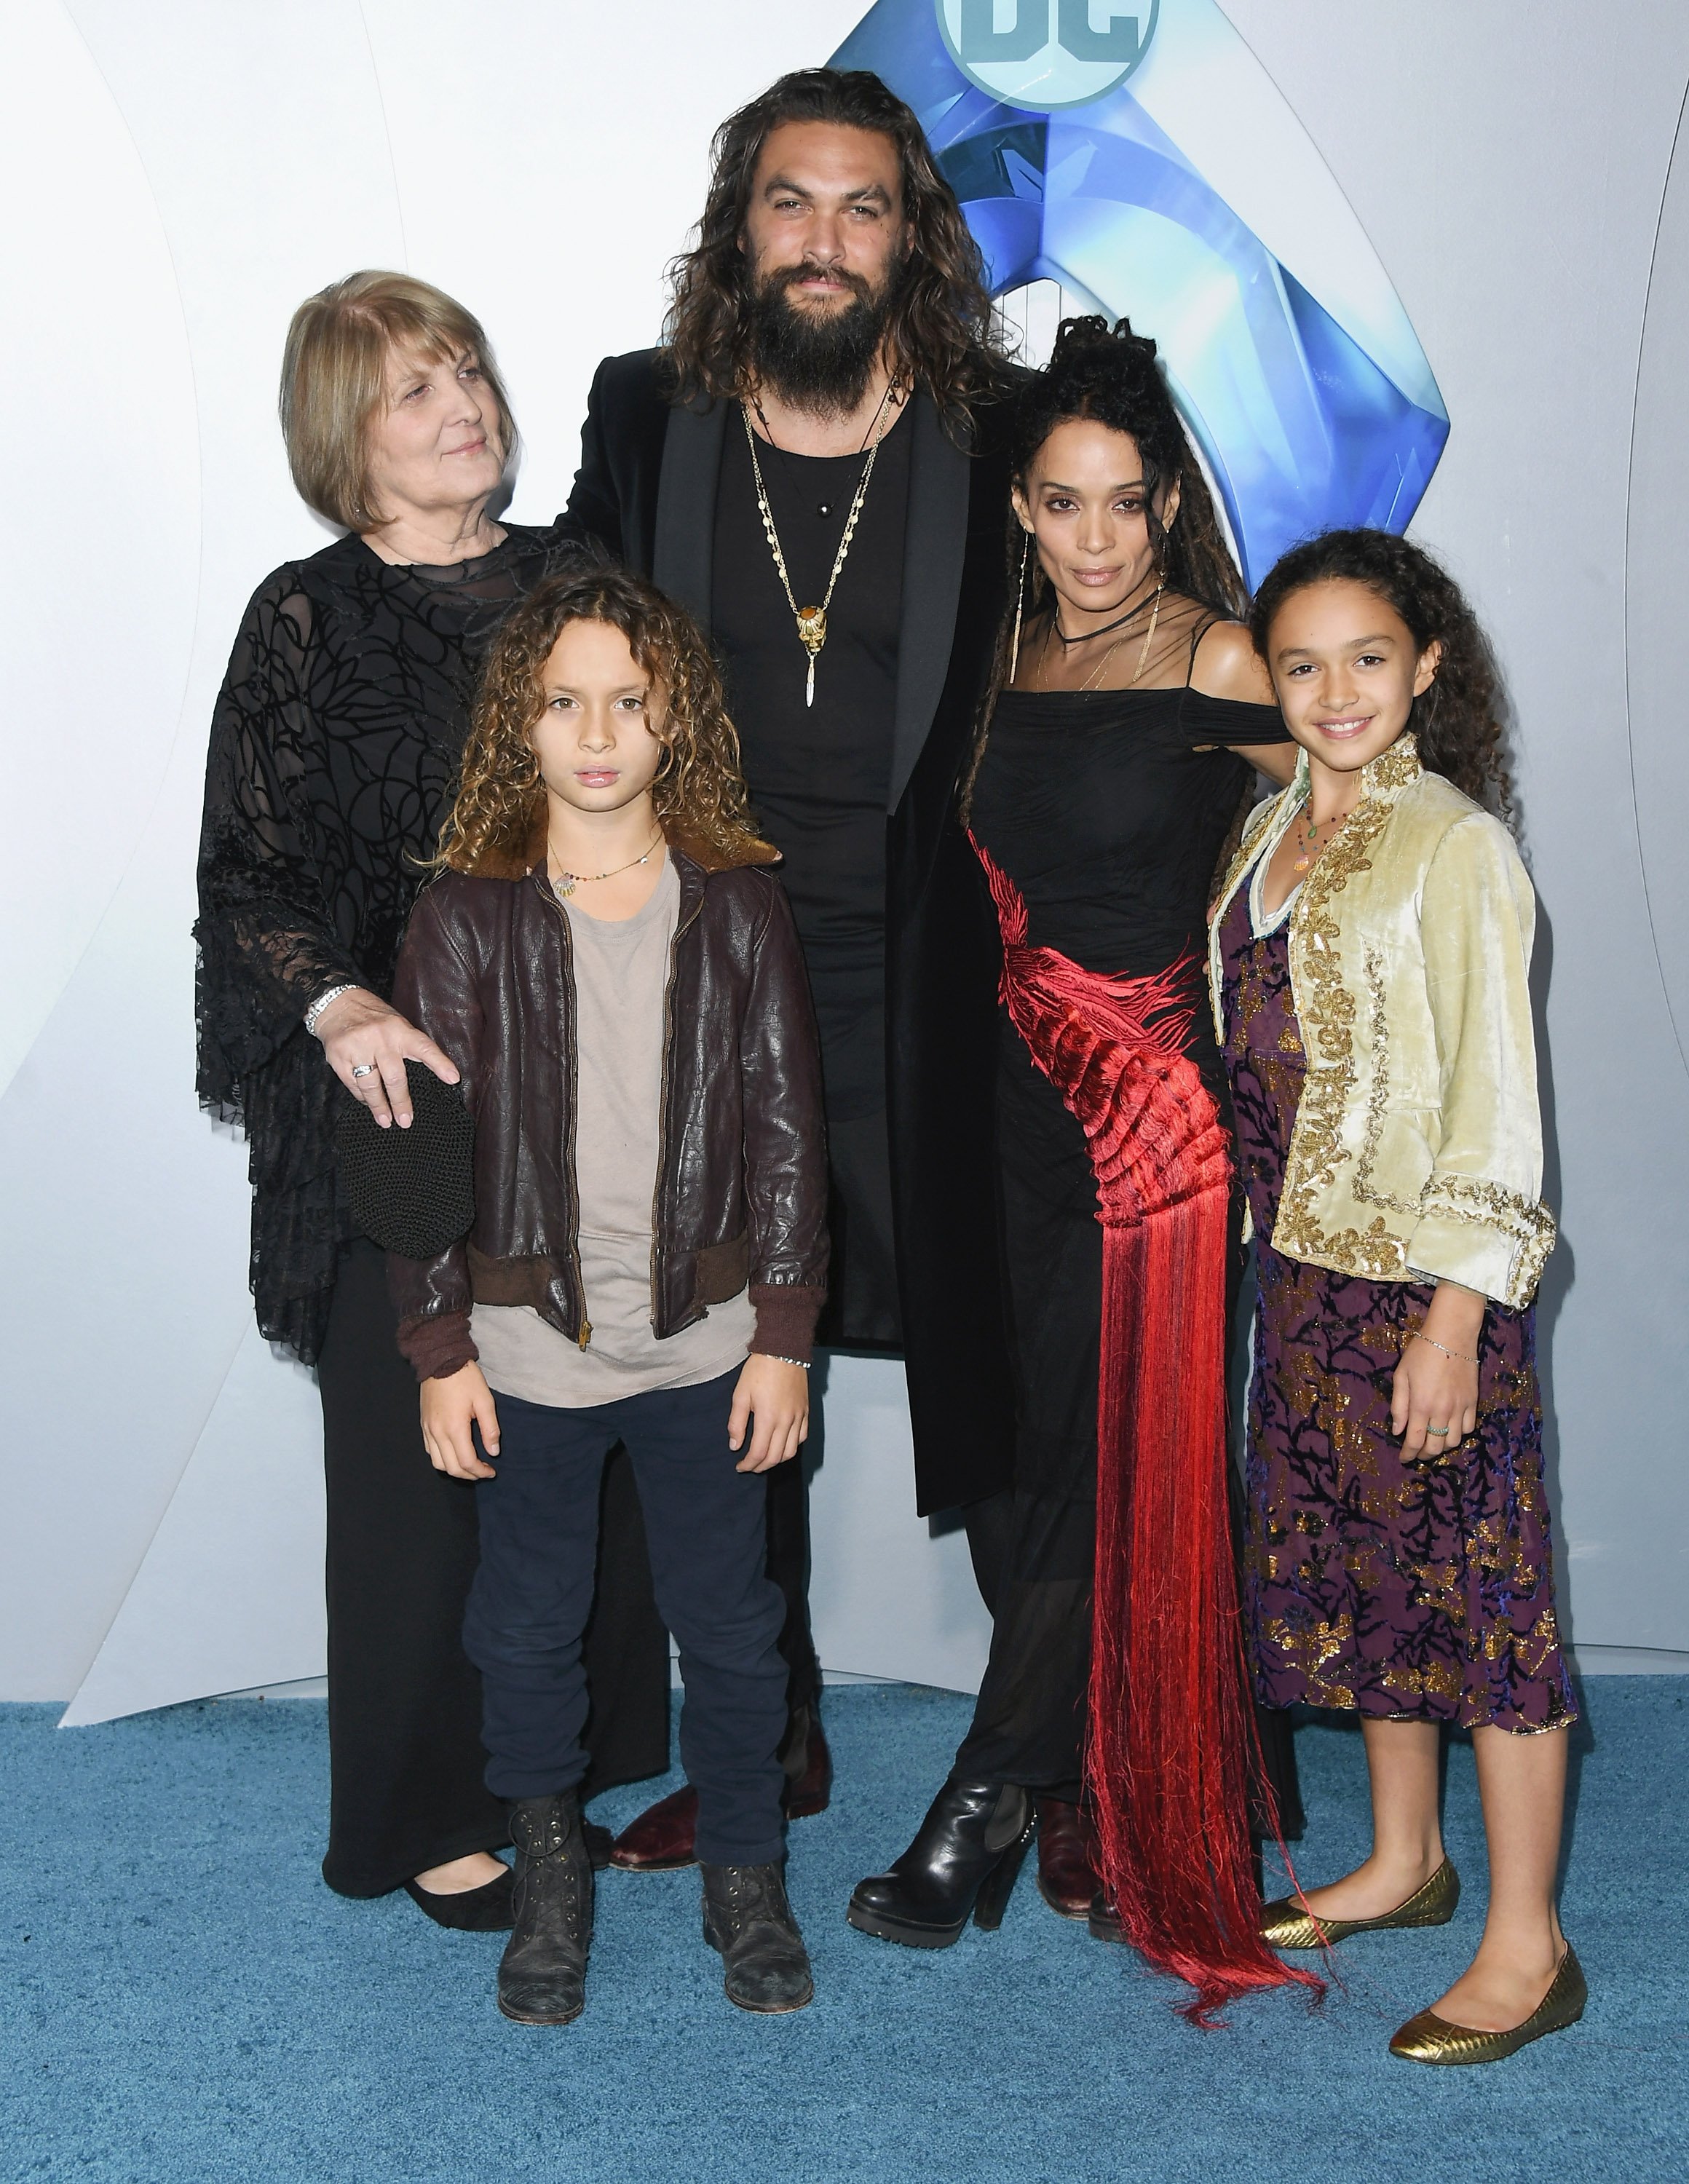 Jason Momoa, his mother Coni Momoa, Lisa Bonet & their kids, Lola and Nakoa-Wolf at the premiere of “Aquaman” in Hollywood, California on Dec. 12, 2018. | Photo: Getty Images